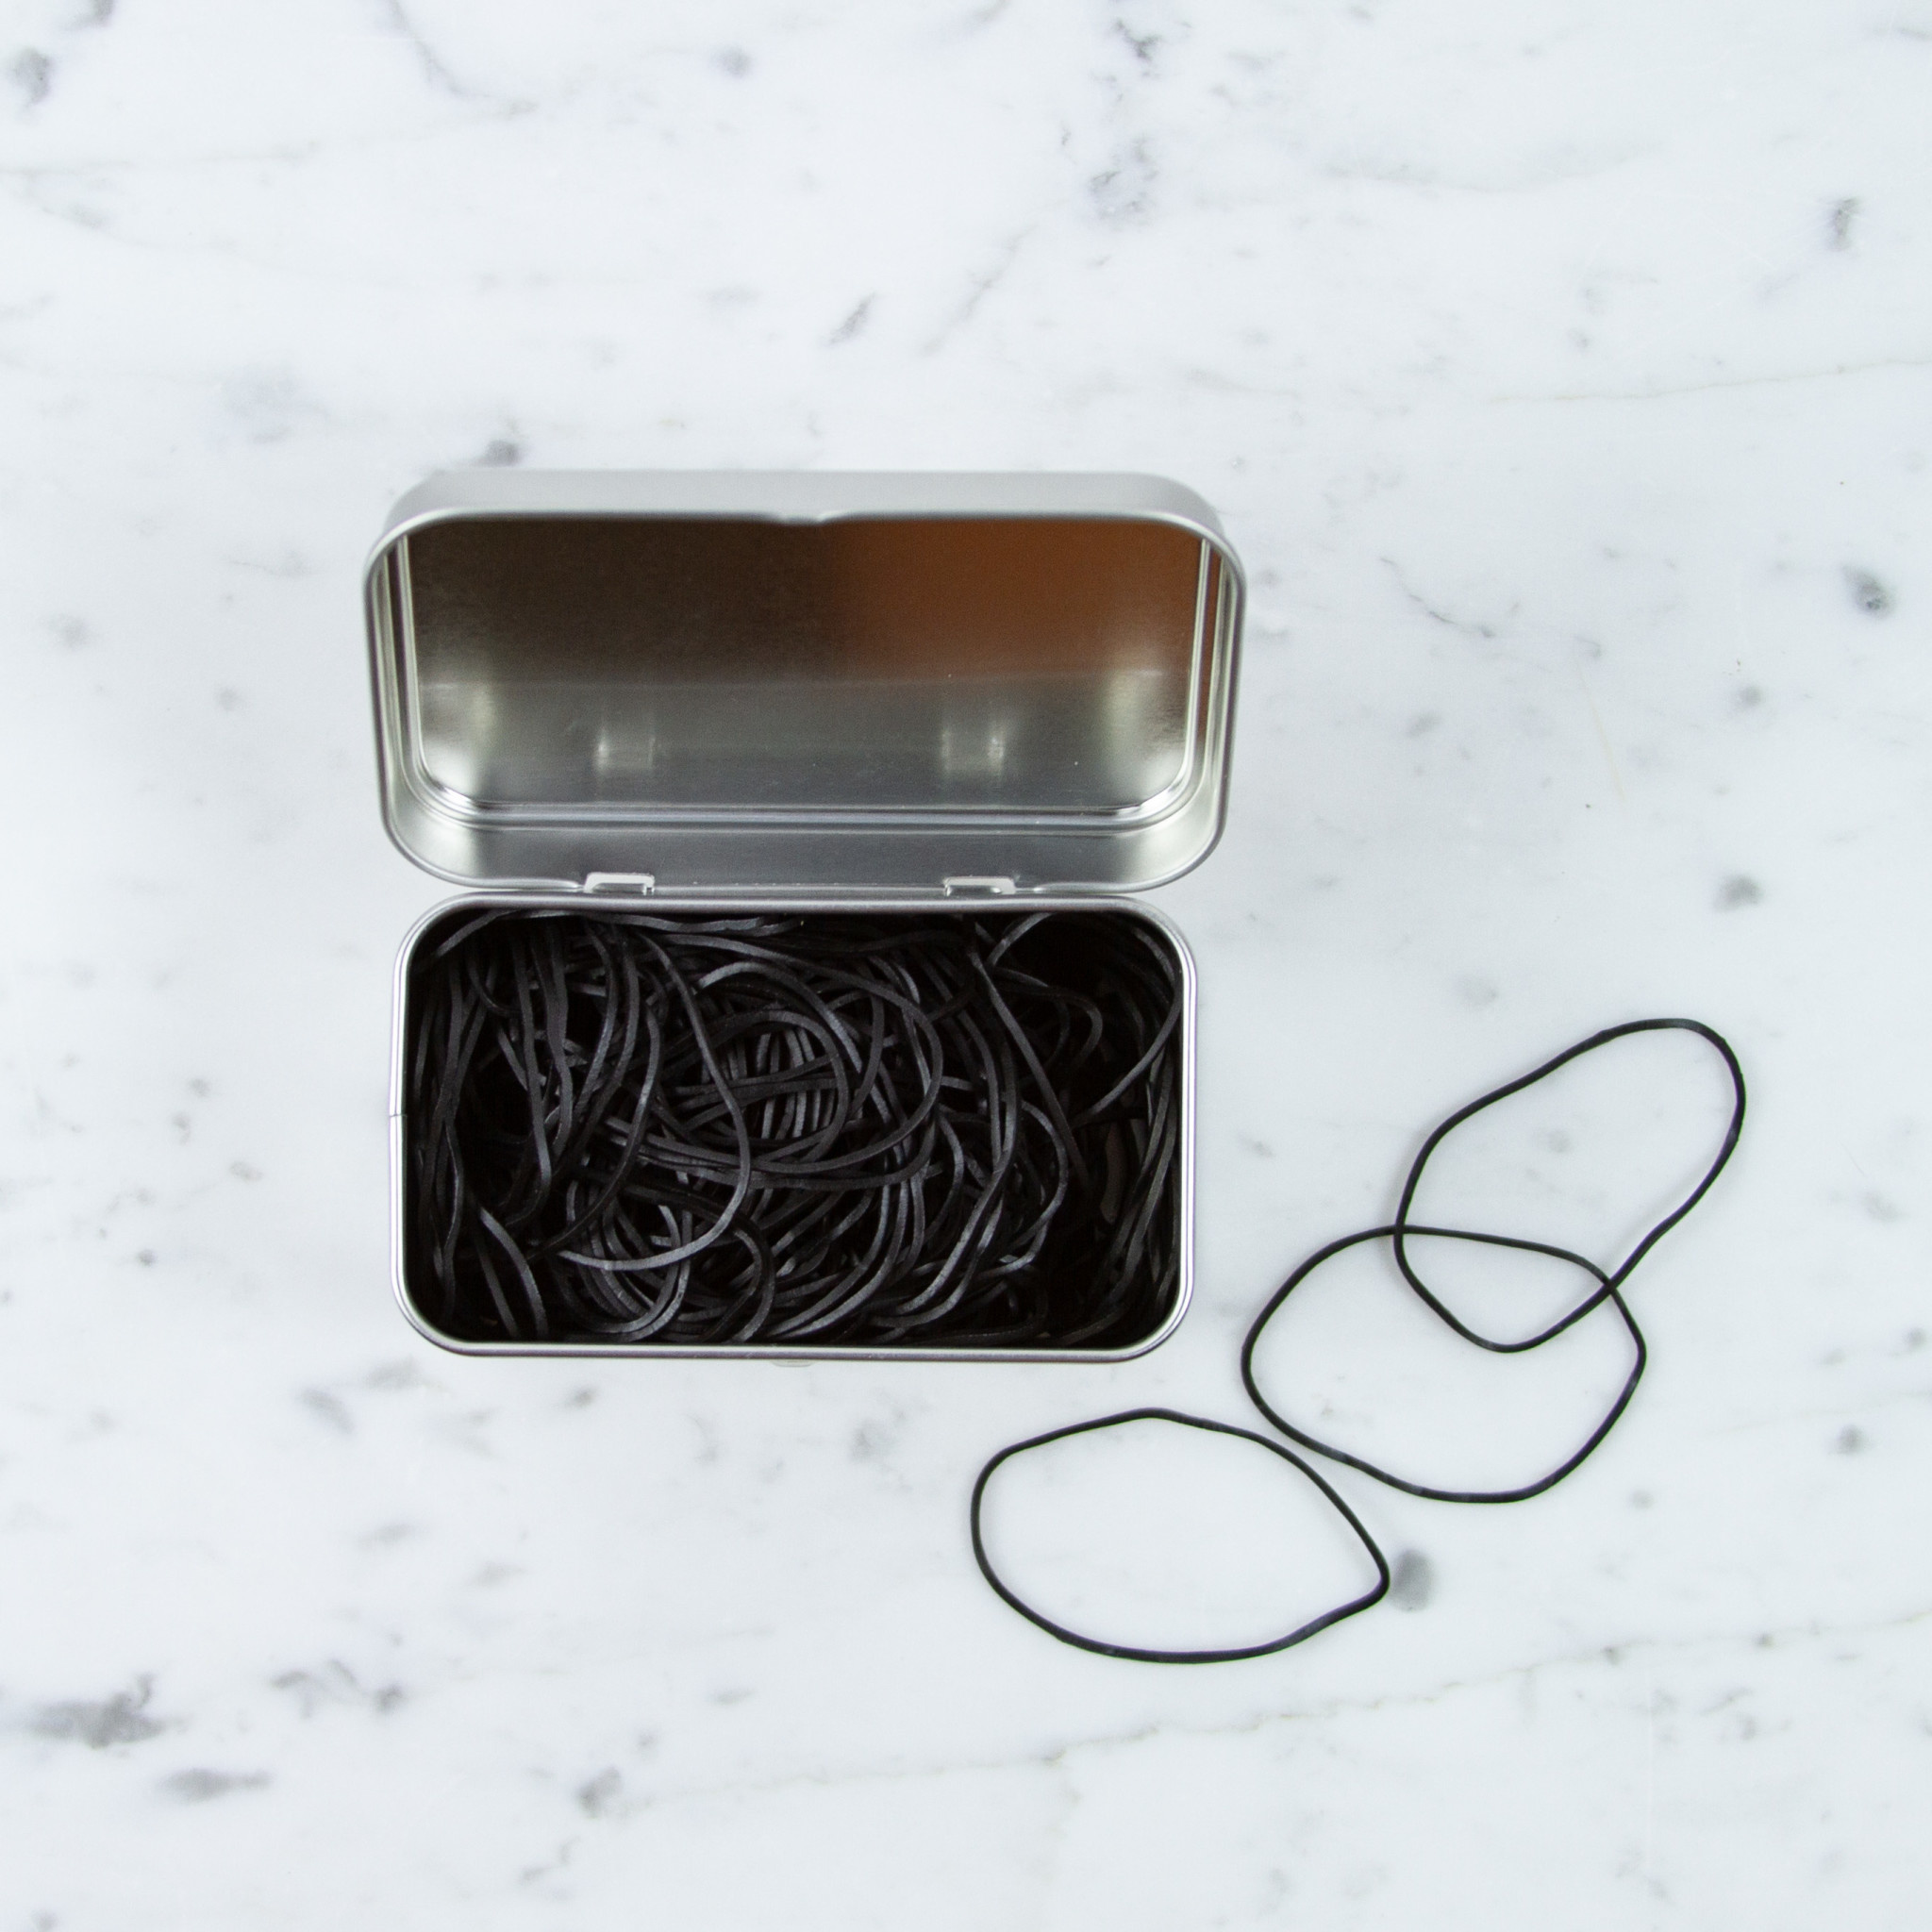 Kyowa O'Band Rubber Bands - Silver Tin with Black Bands